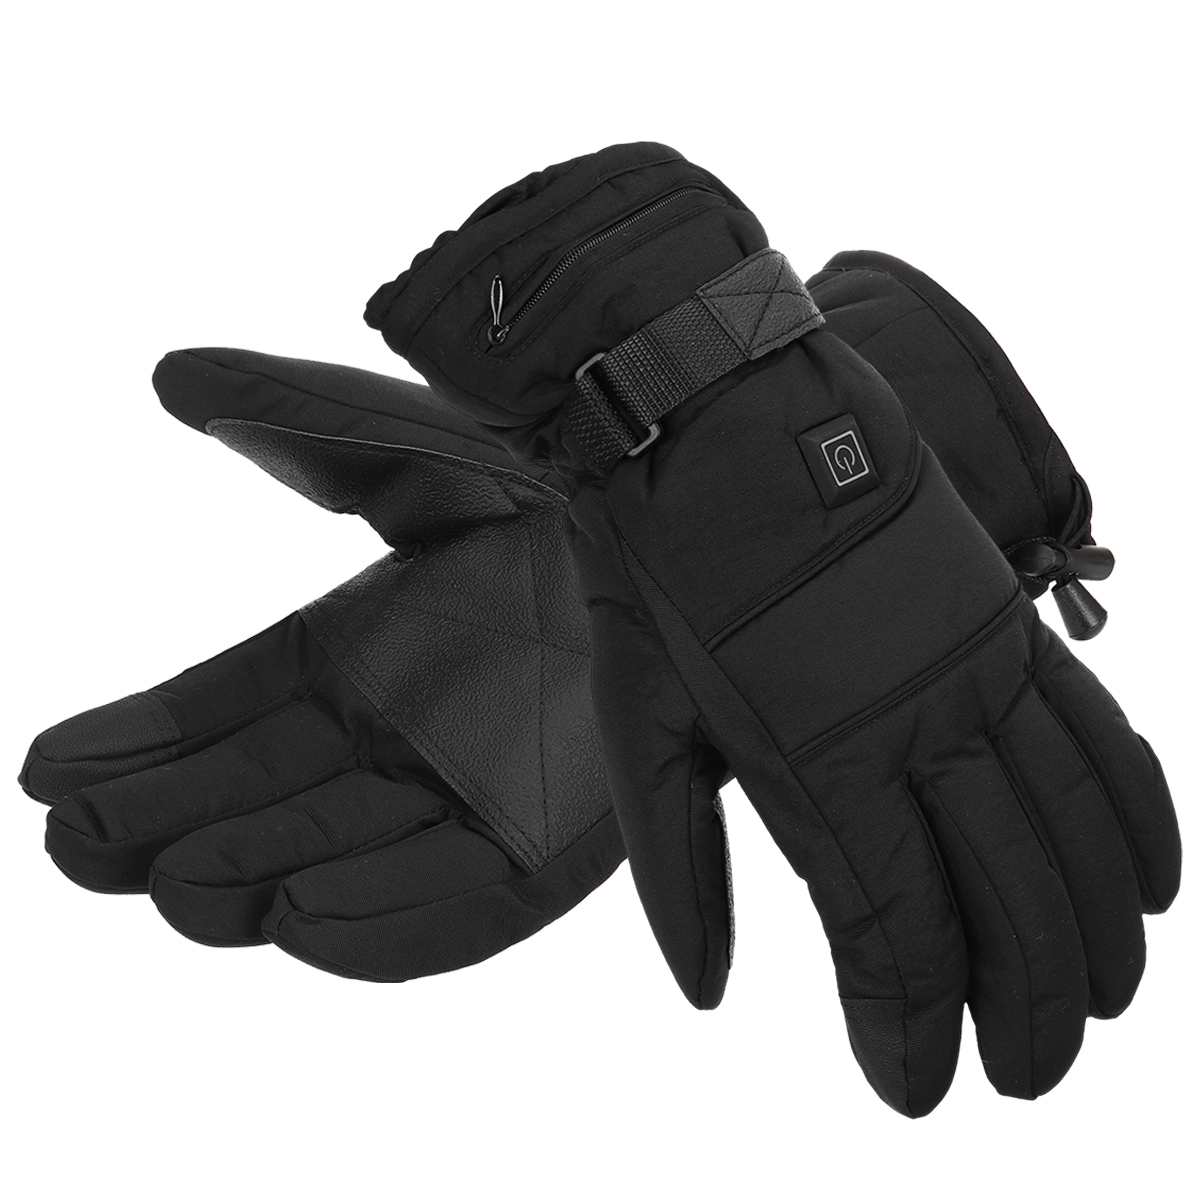 1-Pair-Electric-Heated-Hand-Gloves-3-Modes-Touchscreen-Motorbike-Motorcycle-Winter-Warm-Heated-Batte-1756429-9